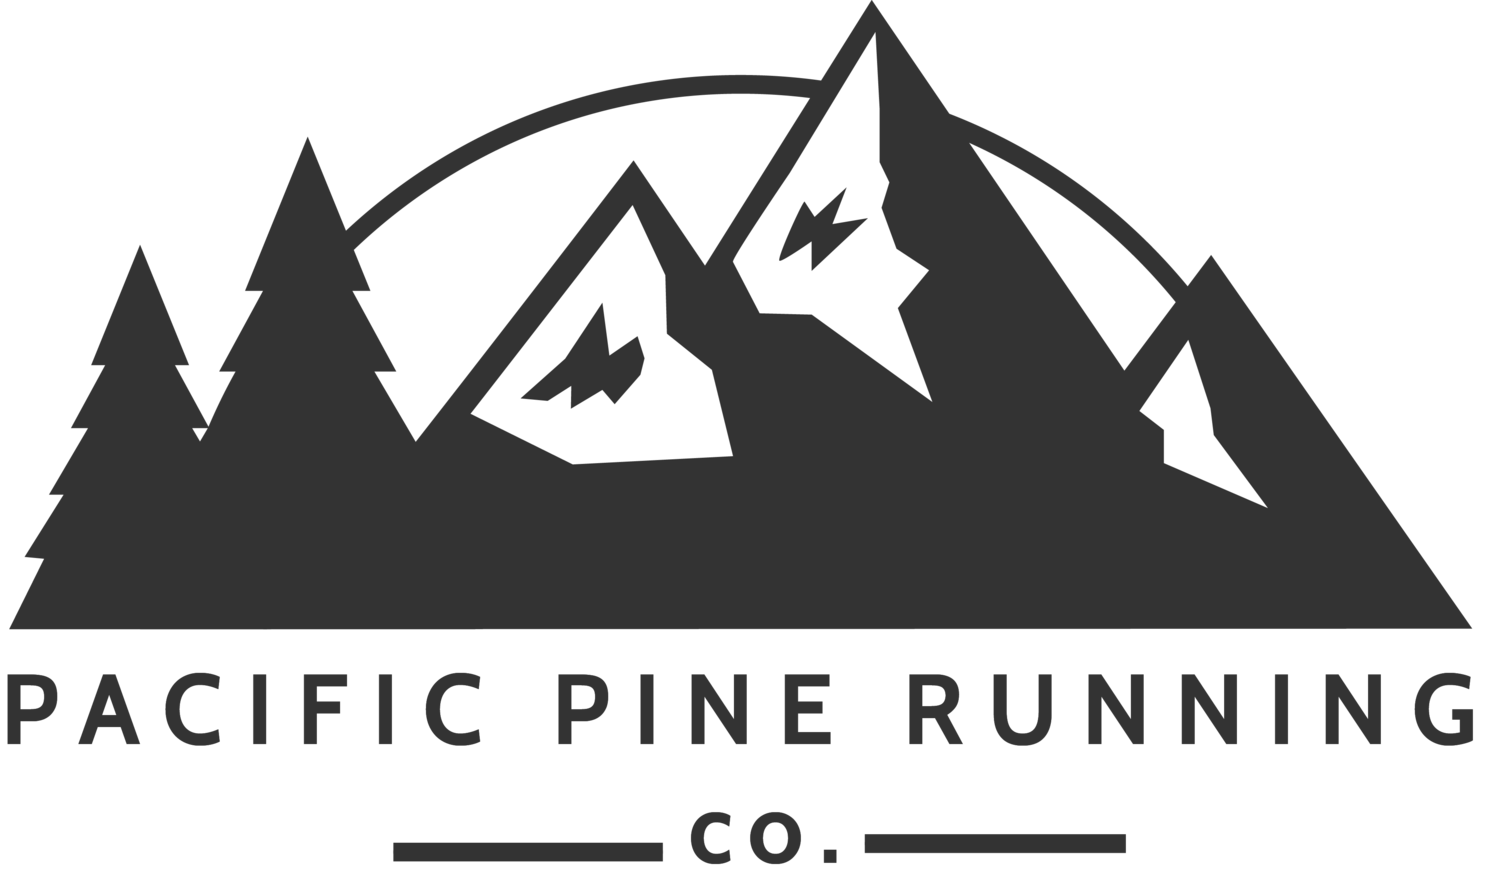 Pacific Pine Running Co.